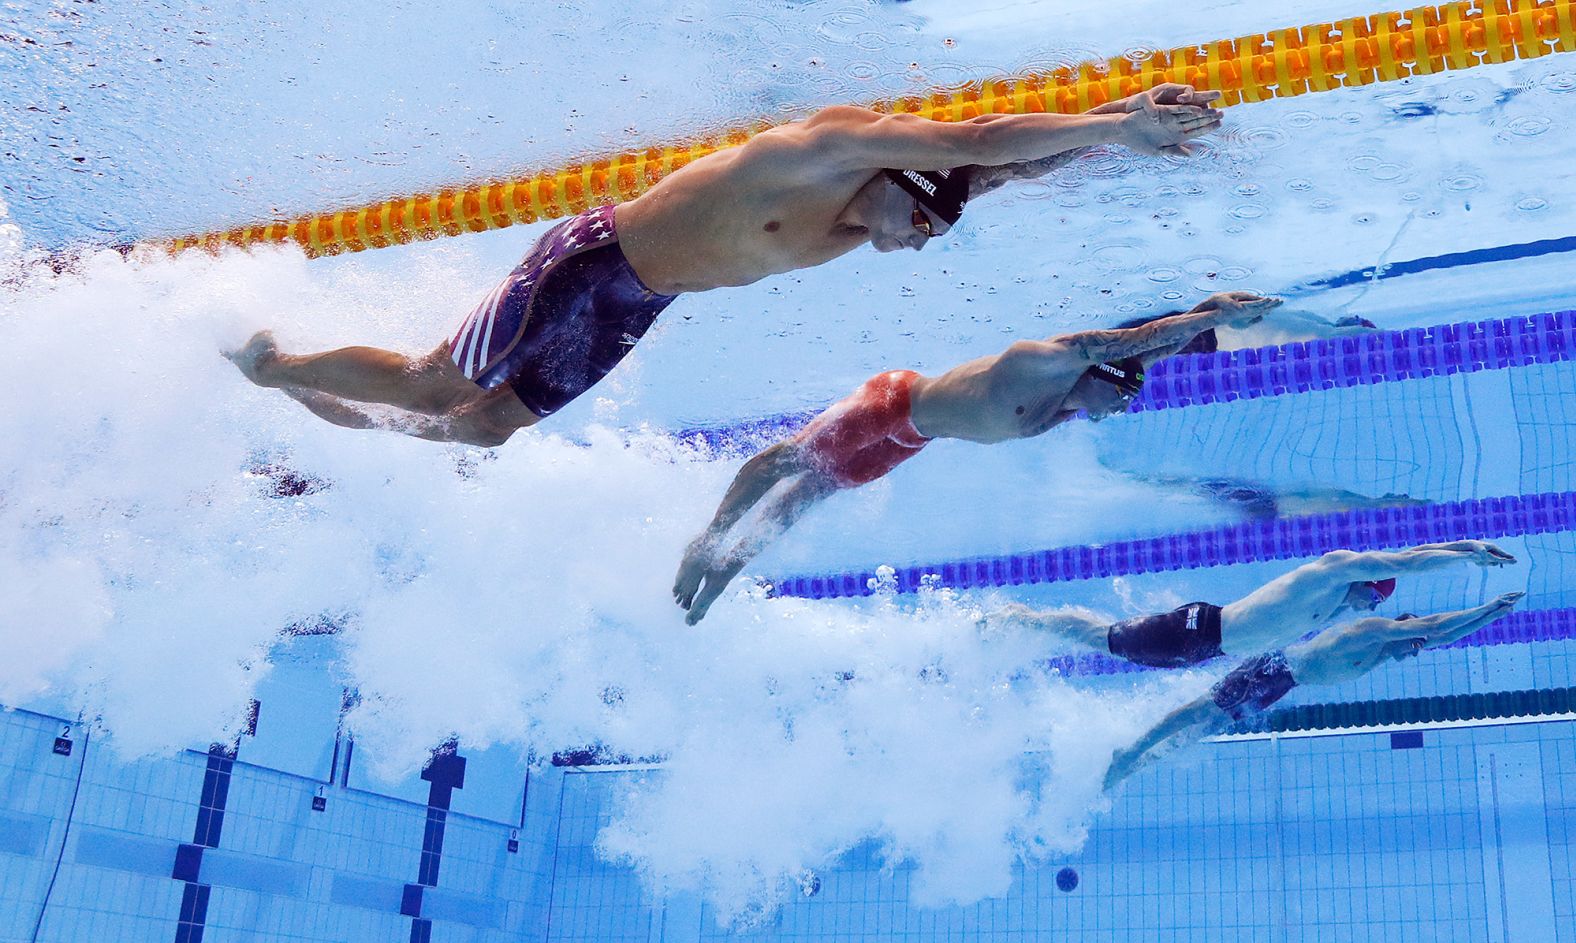 From left, the United States' Caeleb Dressel, Brazil's Bruno Fratus, Great Britain's Benjamin Proud and Italy's Lorenzo Zazzeri swim the 50-meter freestyle final on August 1. <a href="index.php?page=&url=https%3A%2F%2Fwww.cnn.com%2Fworld%2Flive-news%2Ftokyo-2020-olympics-07-31-21-spt%2Fh_c226c17ea9aa7f2579e8e24284aa494f" target="_blank">Dressel went on to win</a> with an Olympic record time of 21.07 seconds. He won five golds in Tokyo.